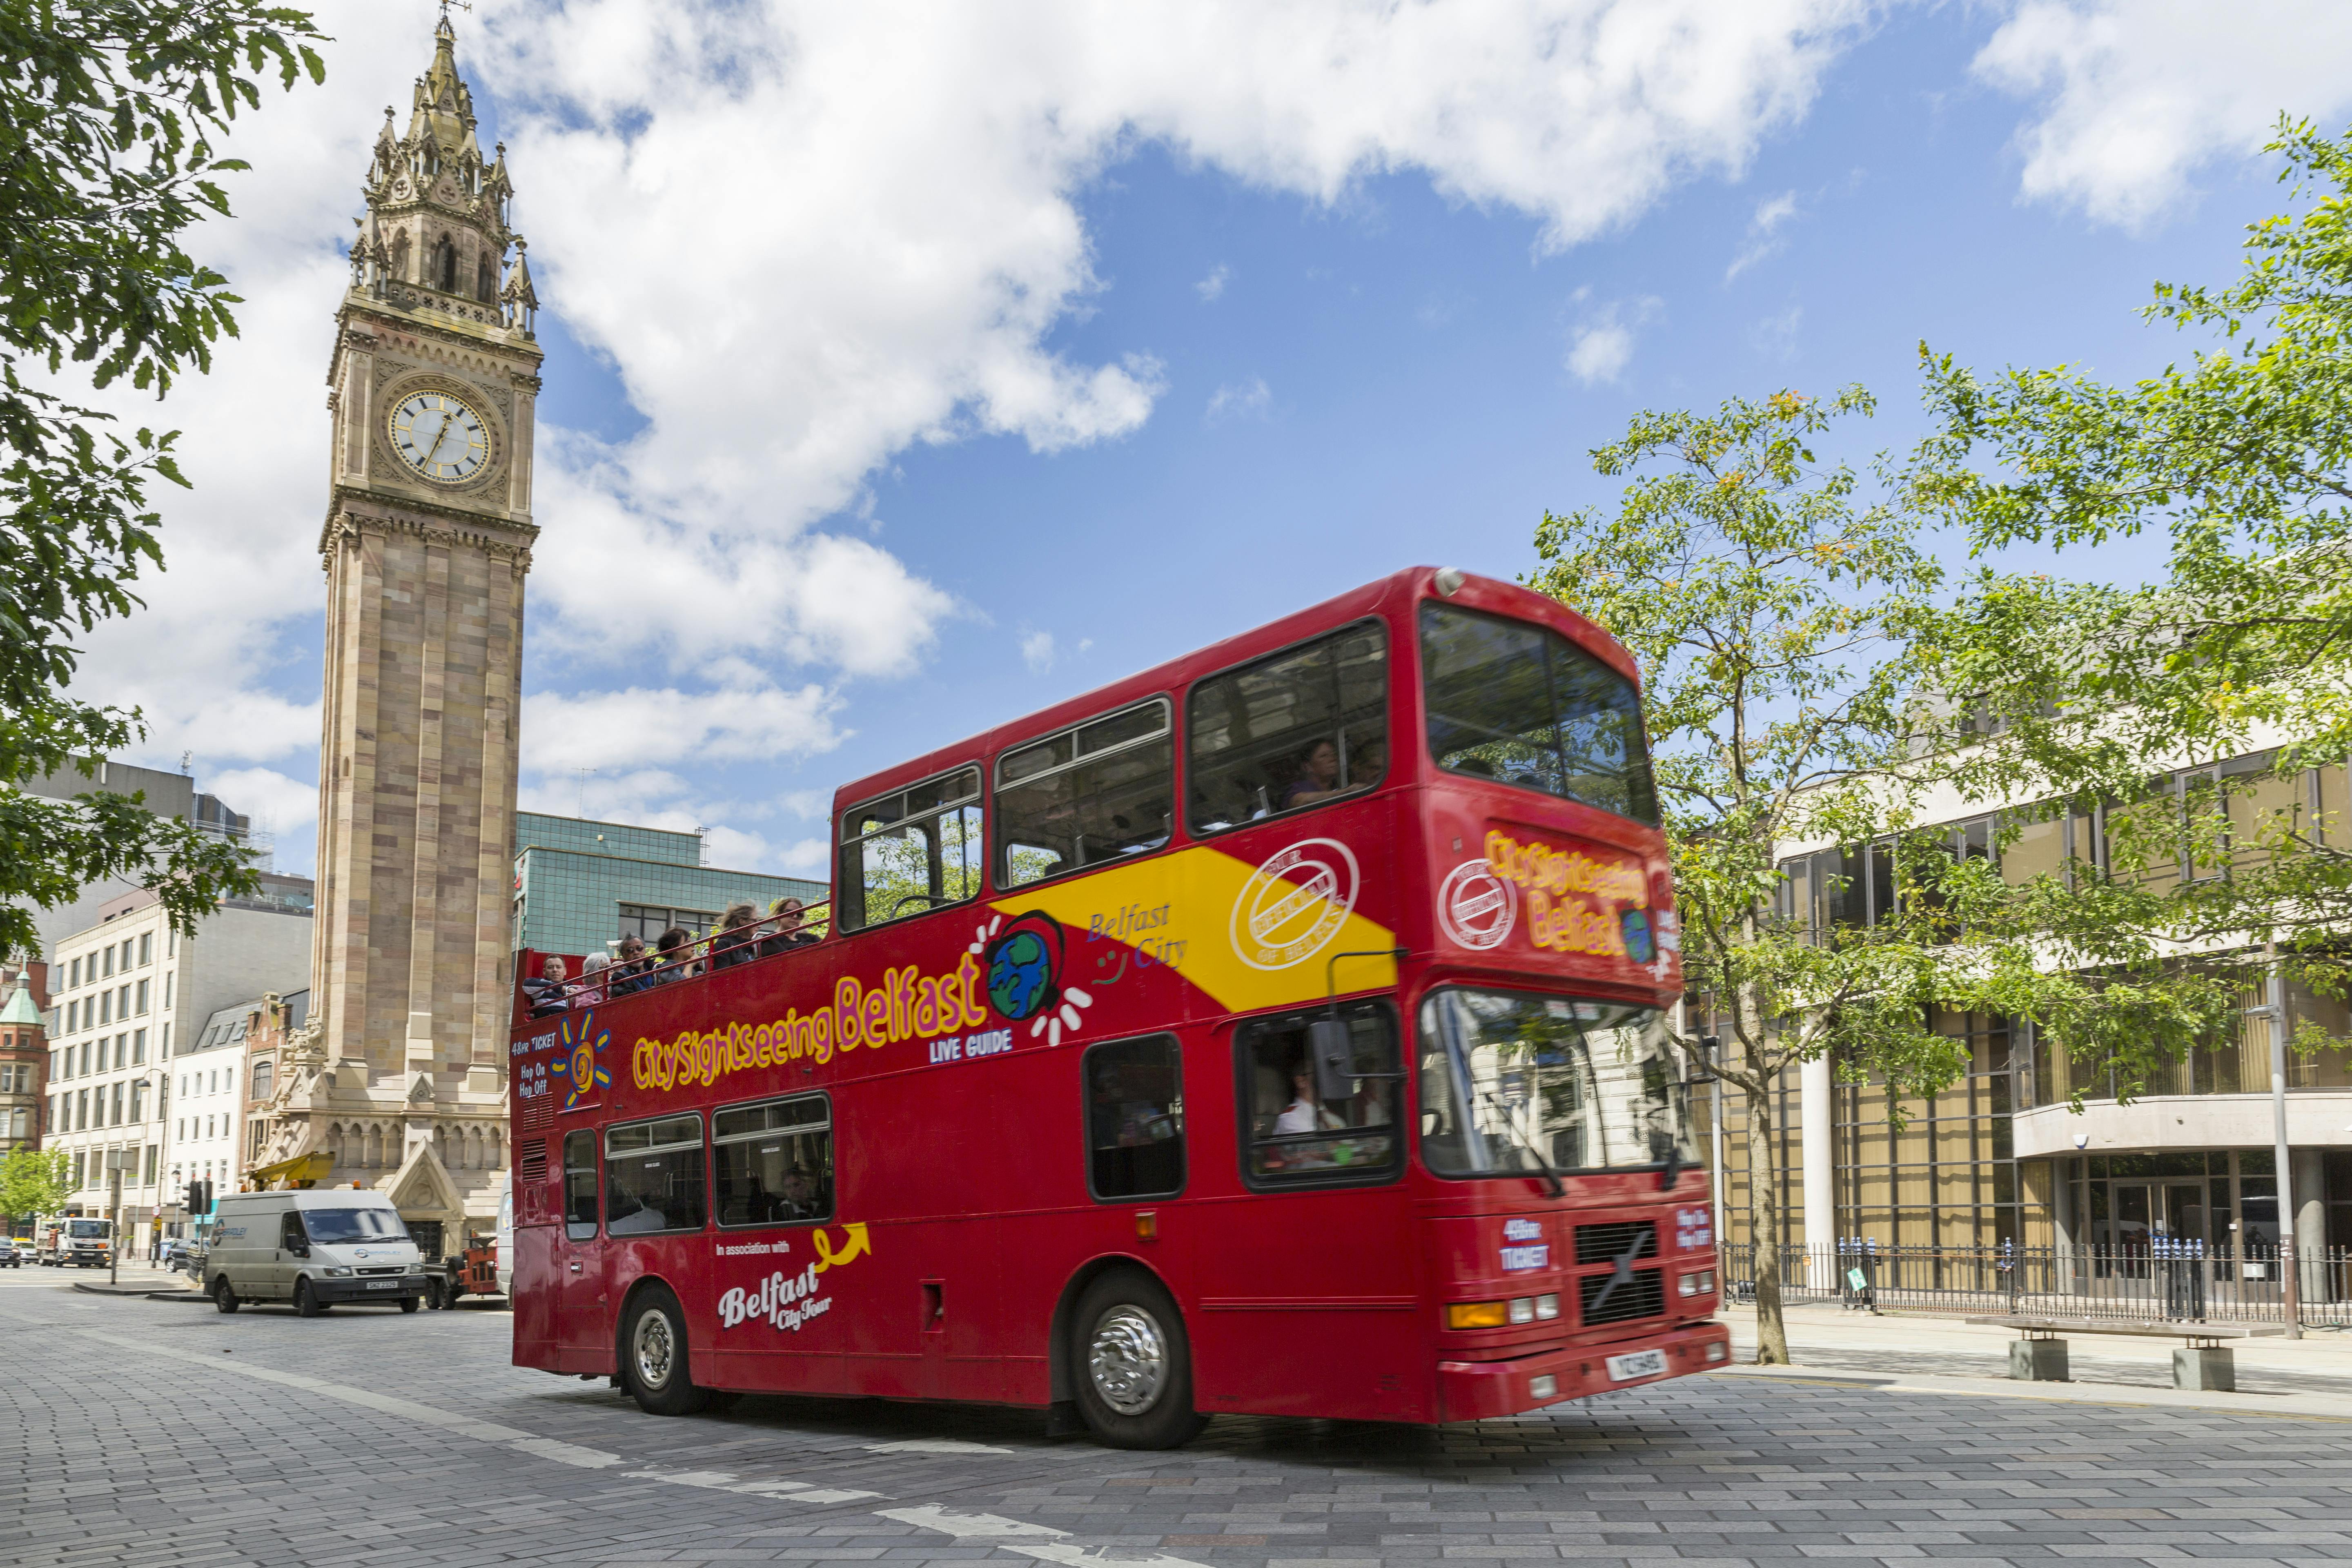 Tour in autobus hop-on hop-off City Sightseeing di Belfast